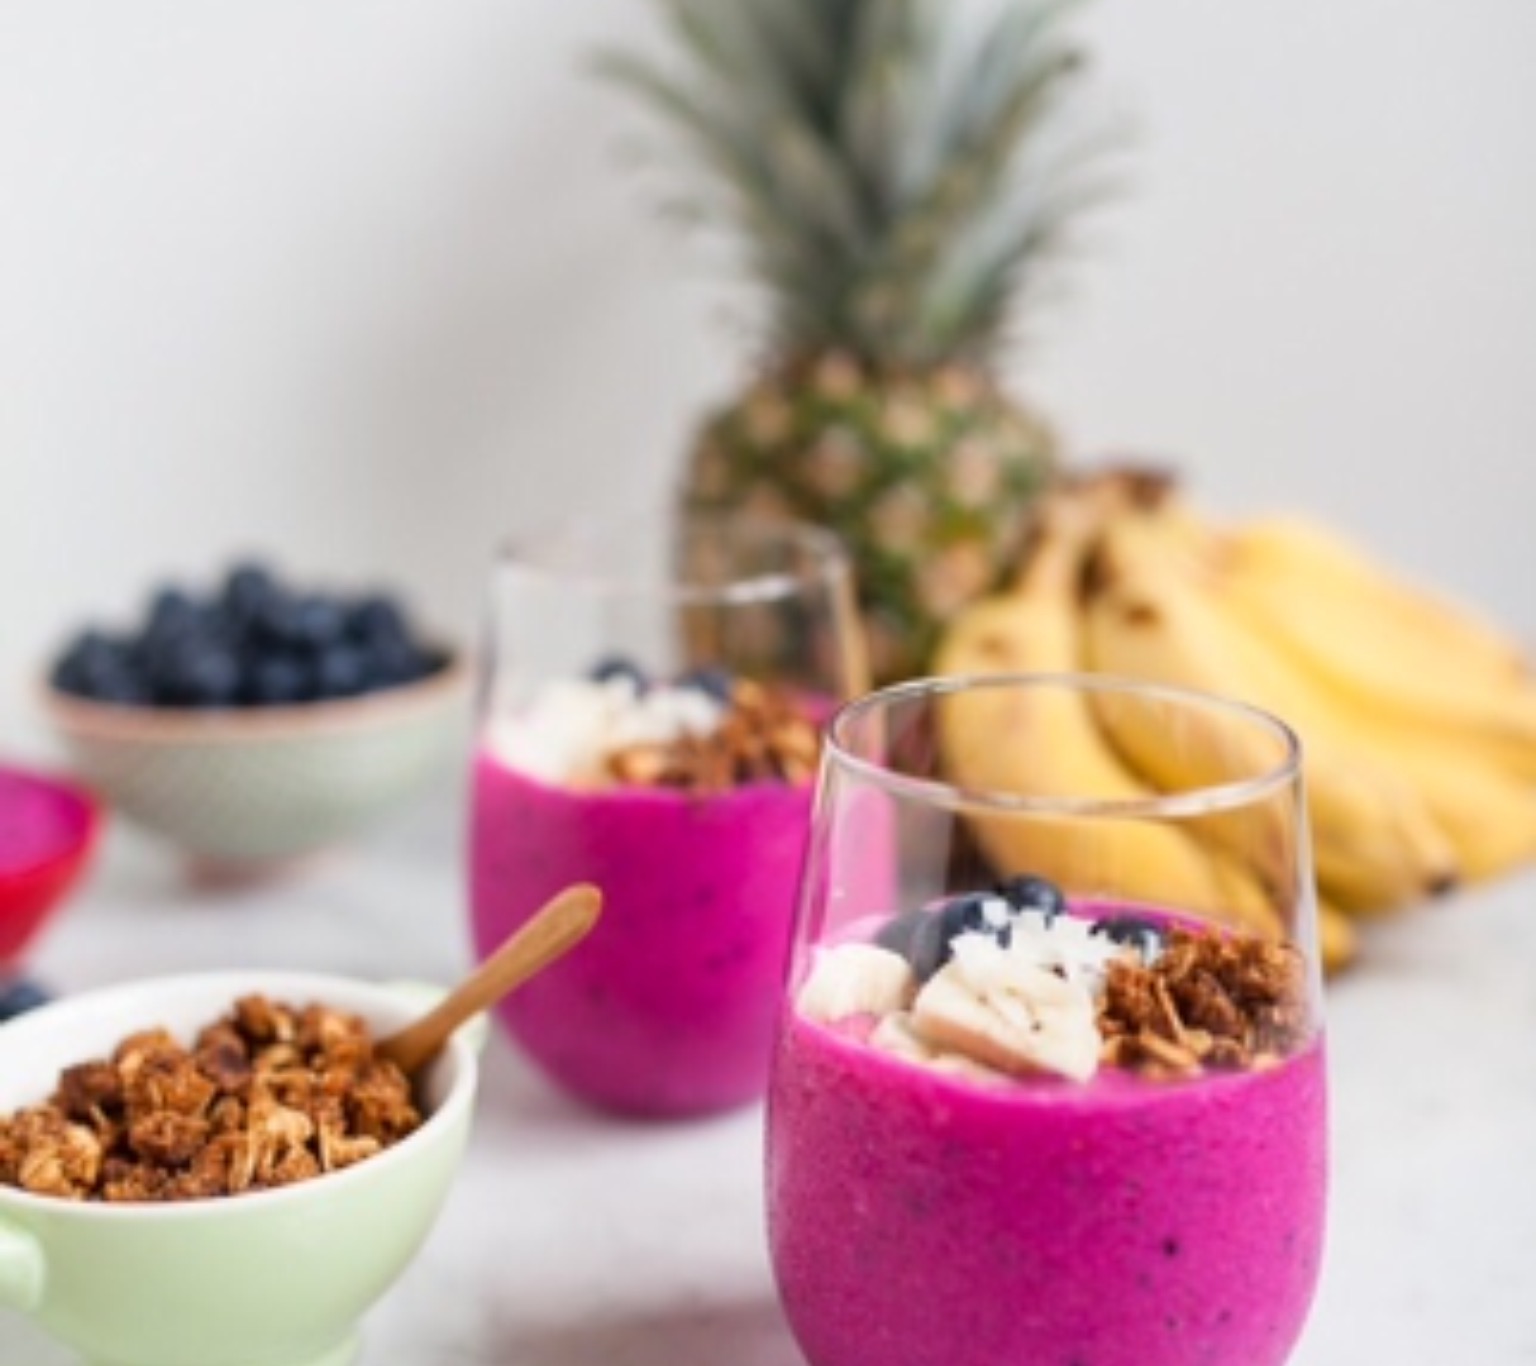 Craving A Summer Smoothie? Here’s 3 Recipes  To Tempt Your Tastebuds Thanks to Alpro